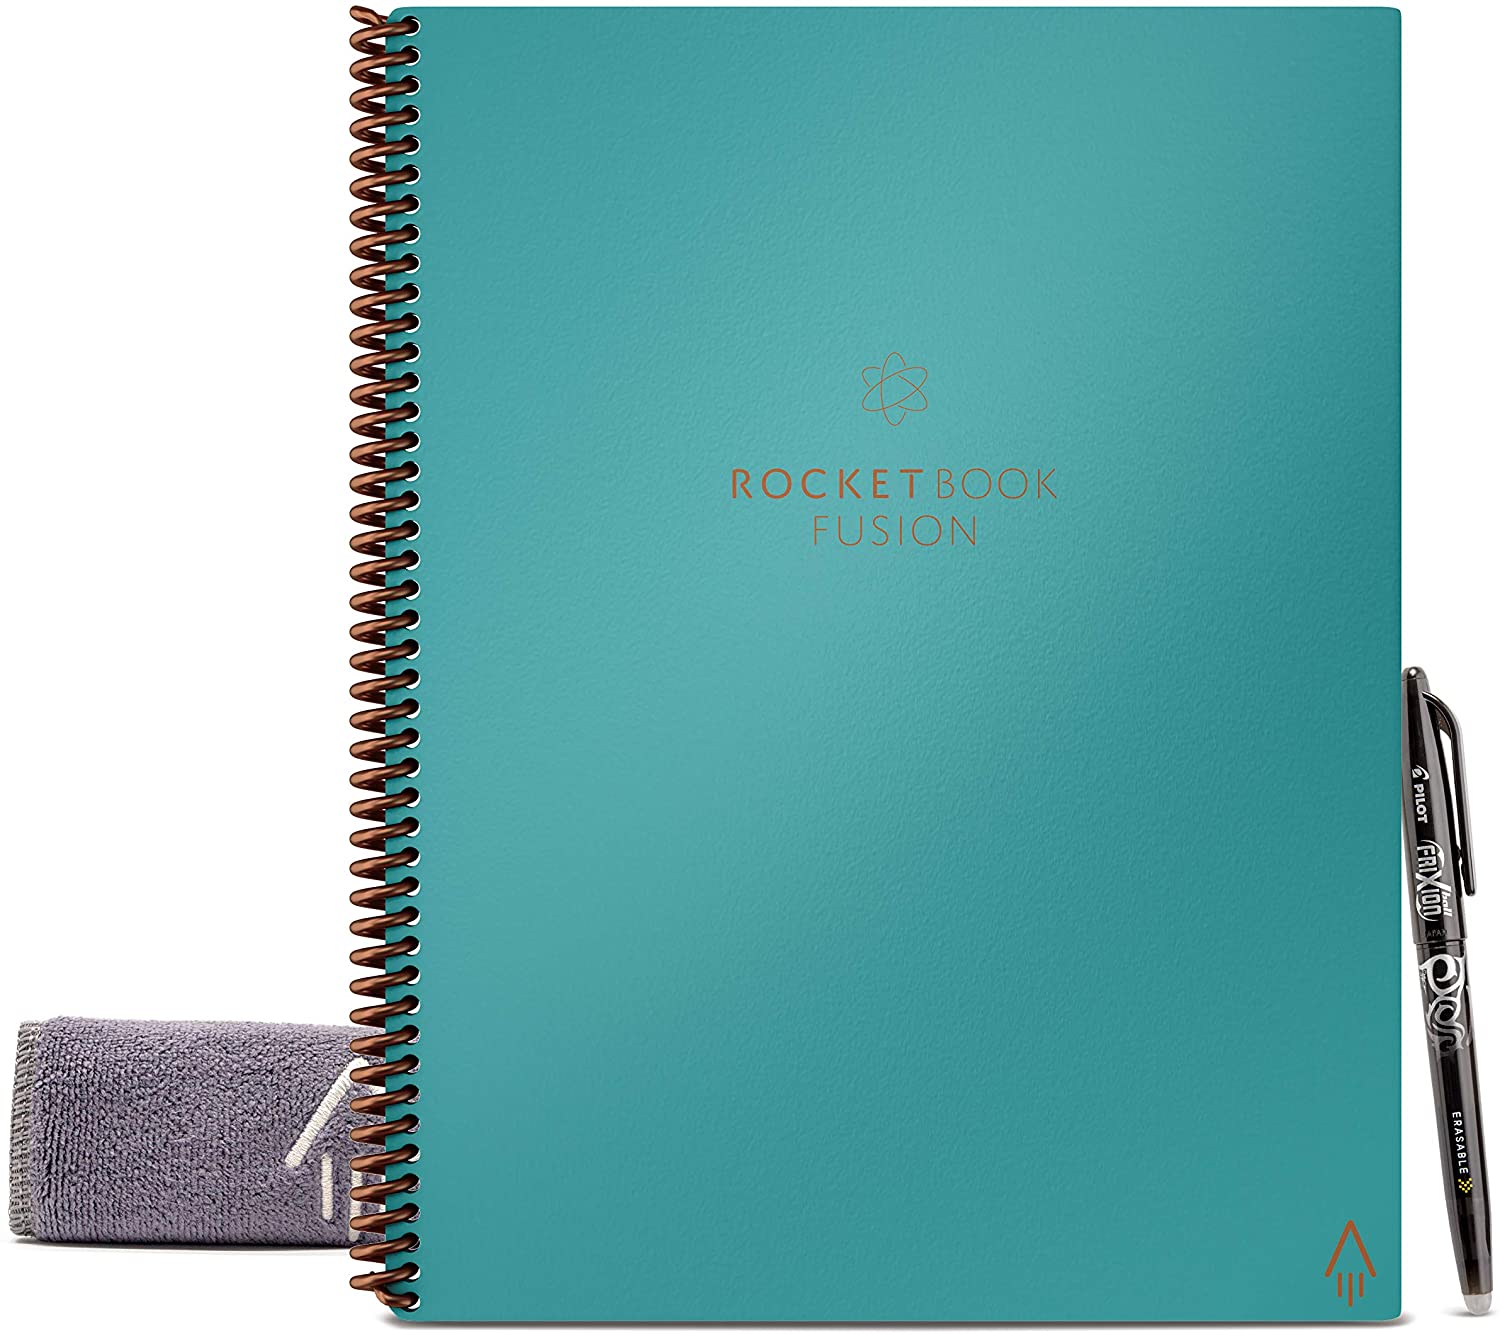 Rocketbook Fusion Smart Reusable Notebook with Pen and Microfiber Cloth